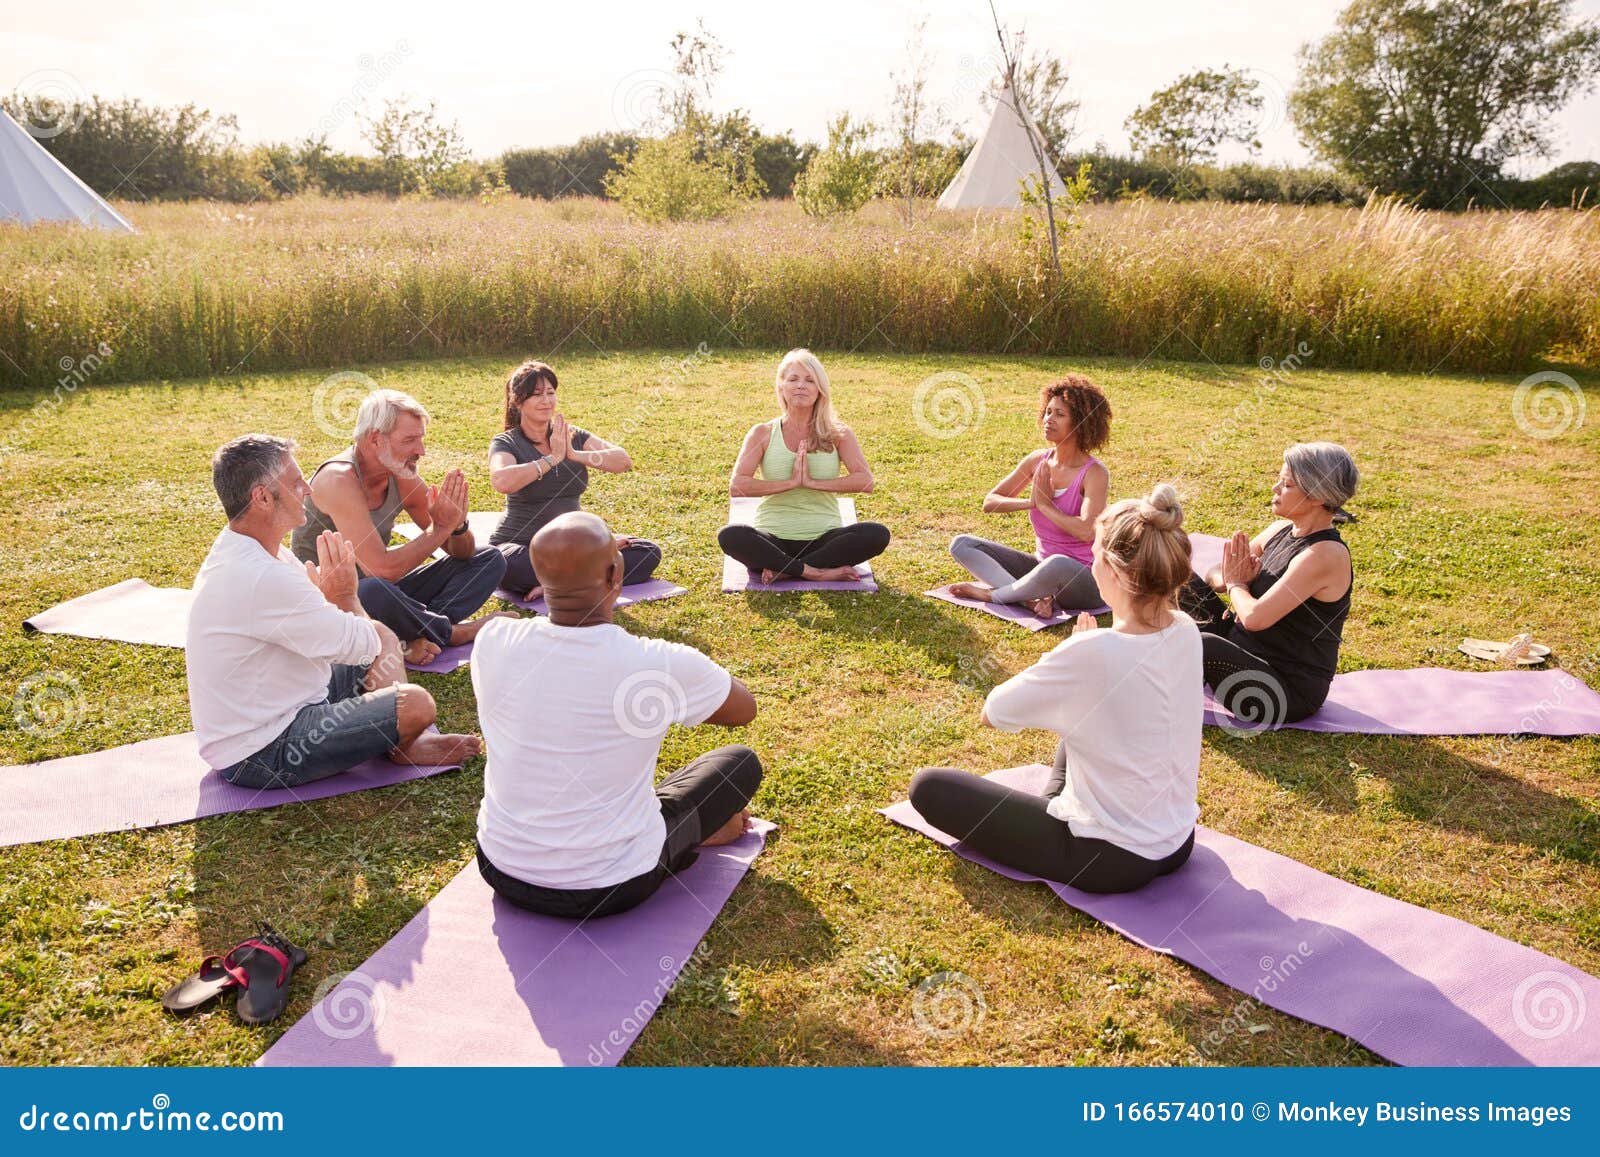 group of mature men and women in class at outdoor yoga retreat sitting circle meditating